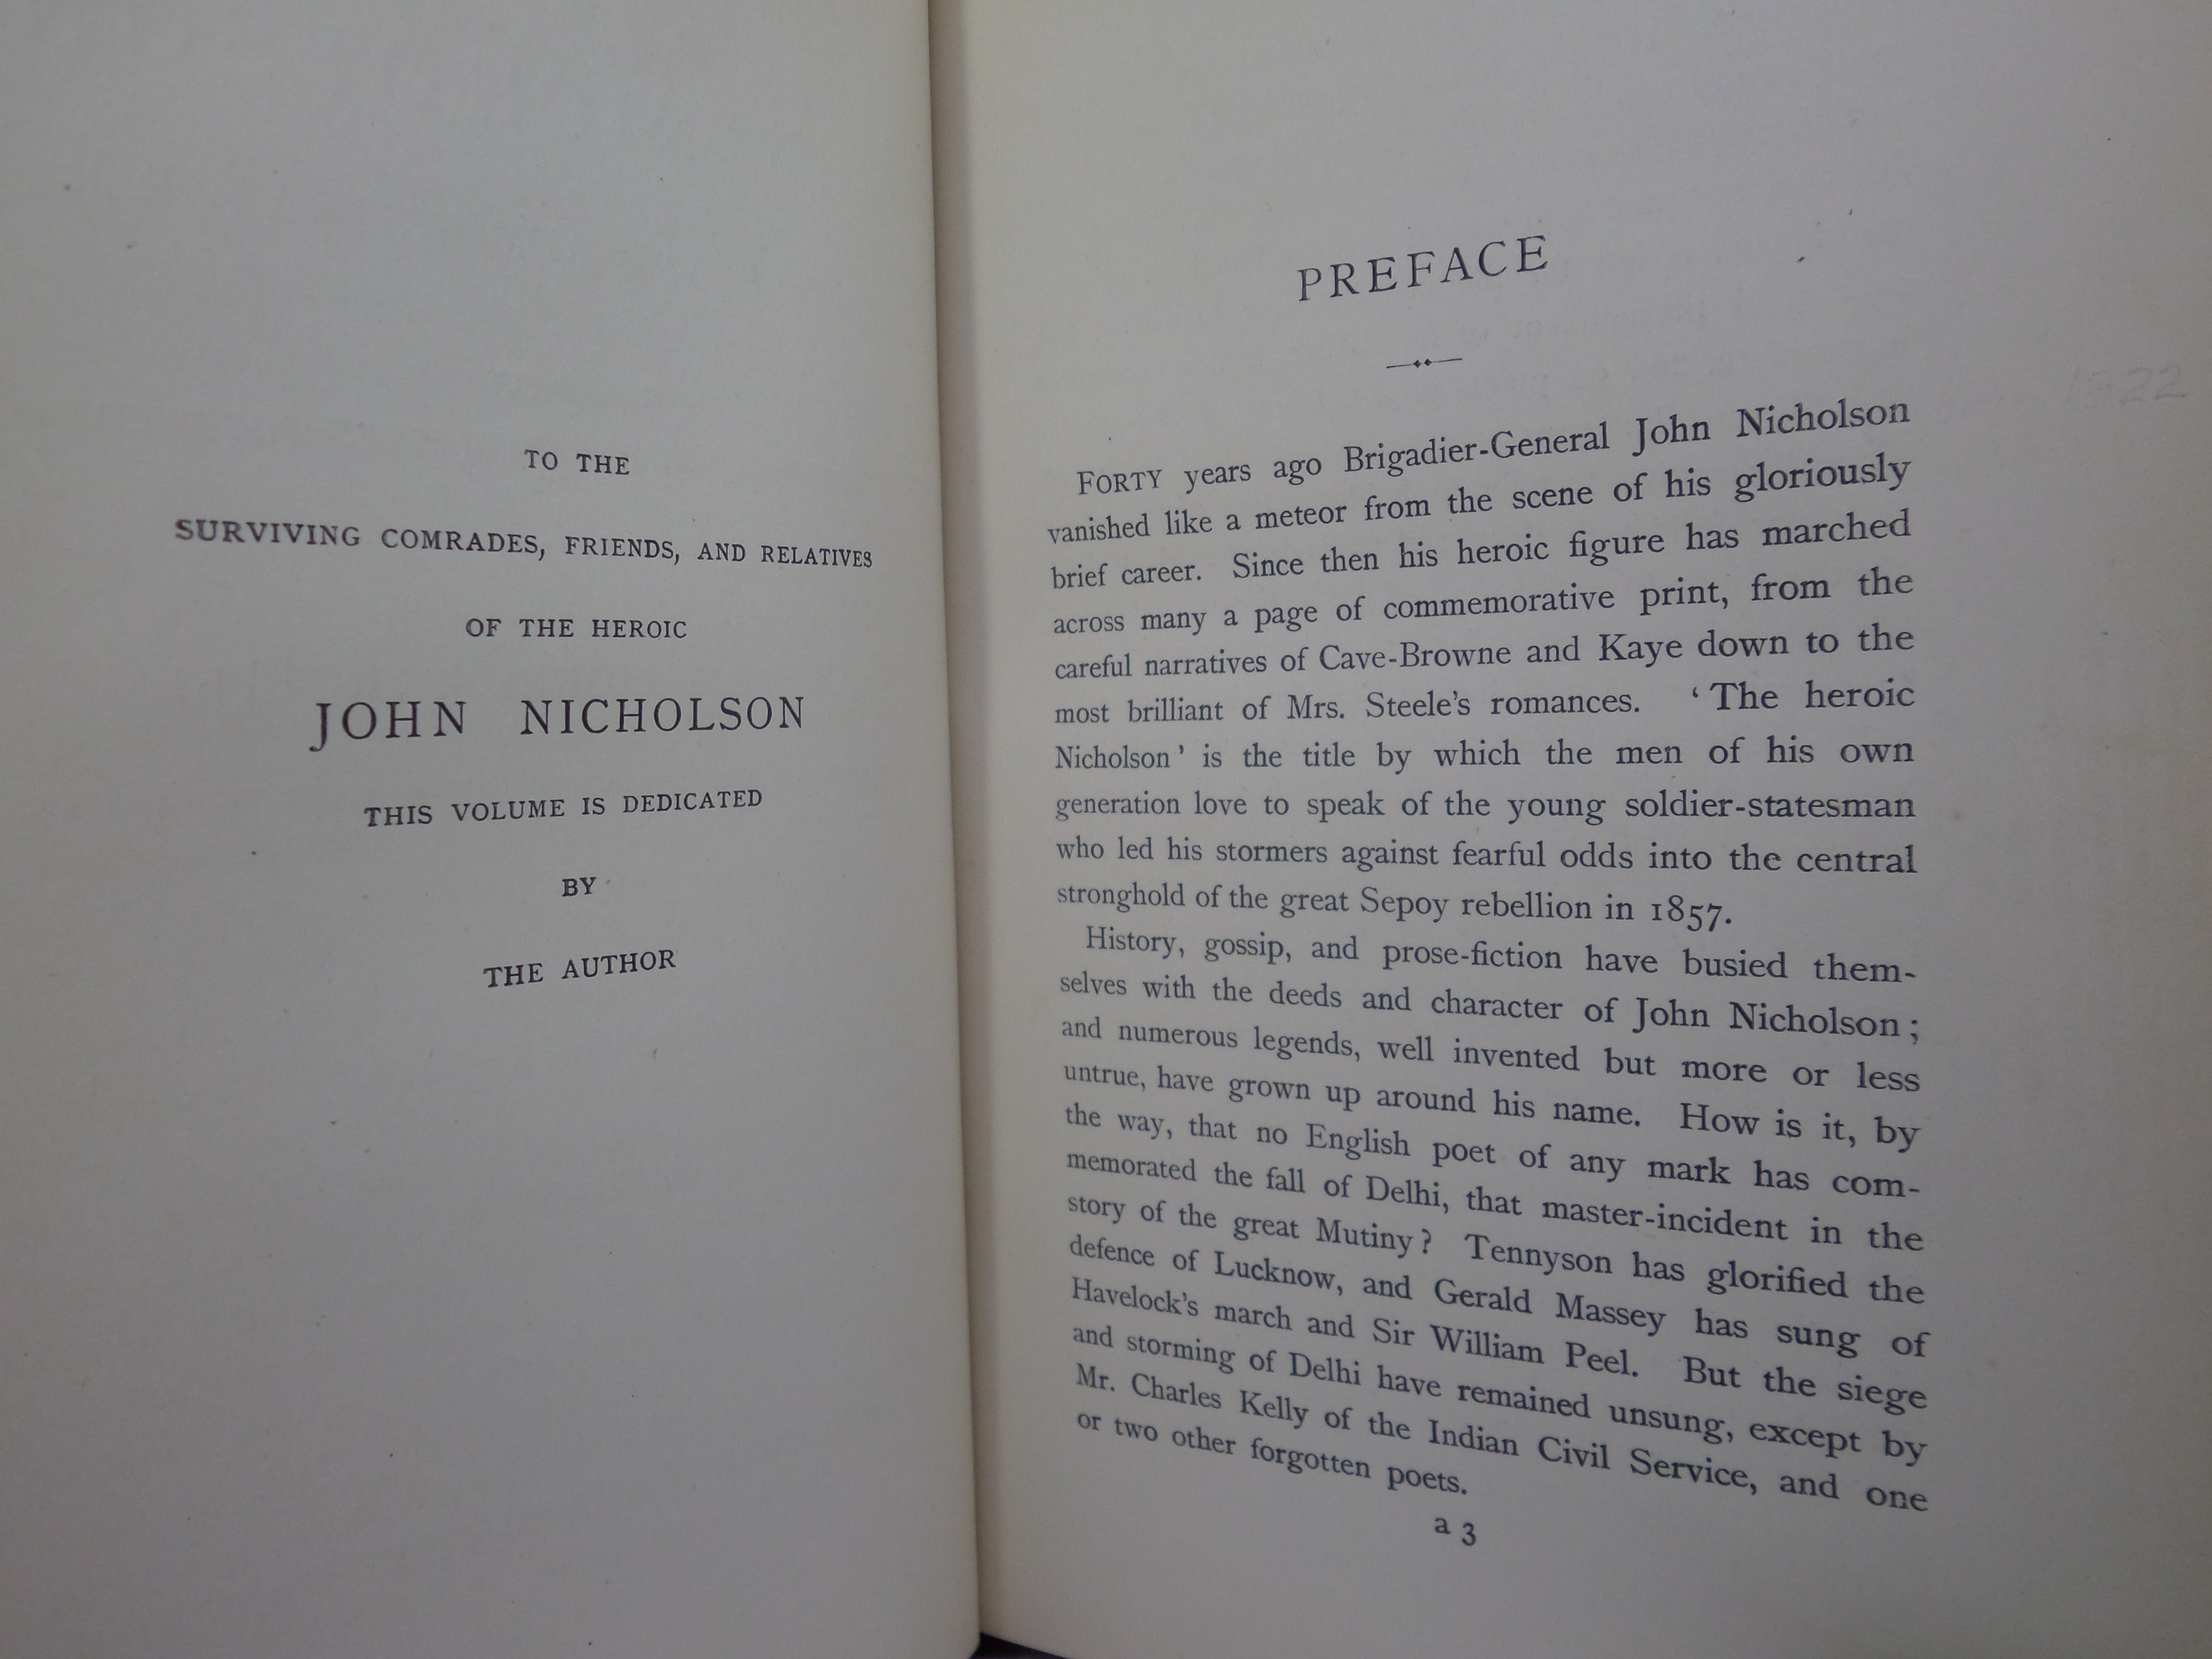 THE LIFE OF JOHN NICHOLSON, SOLDIER AND ADMINISTRATOR BY CAPTAIN LIONEL J. TROTTER 1898 FINELY BOUND BY BAYNTUN-RIVIERE